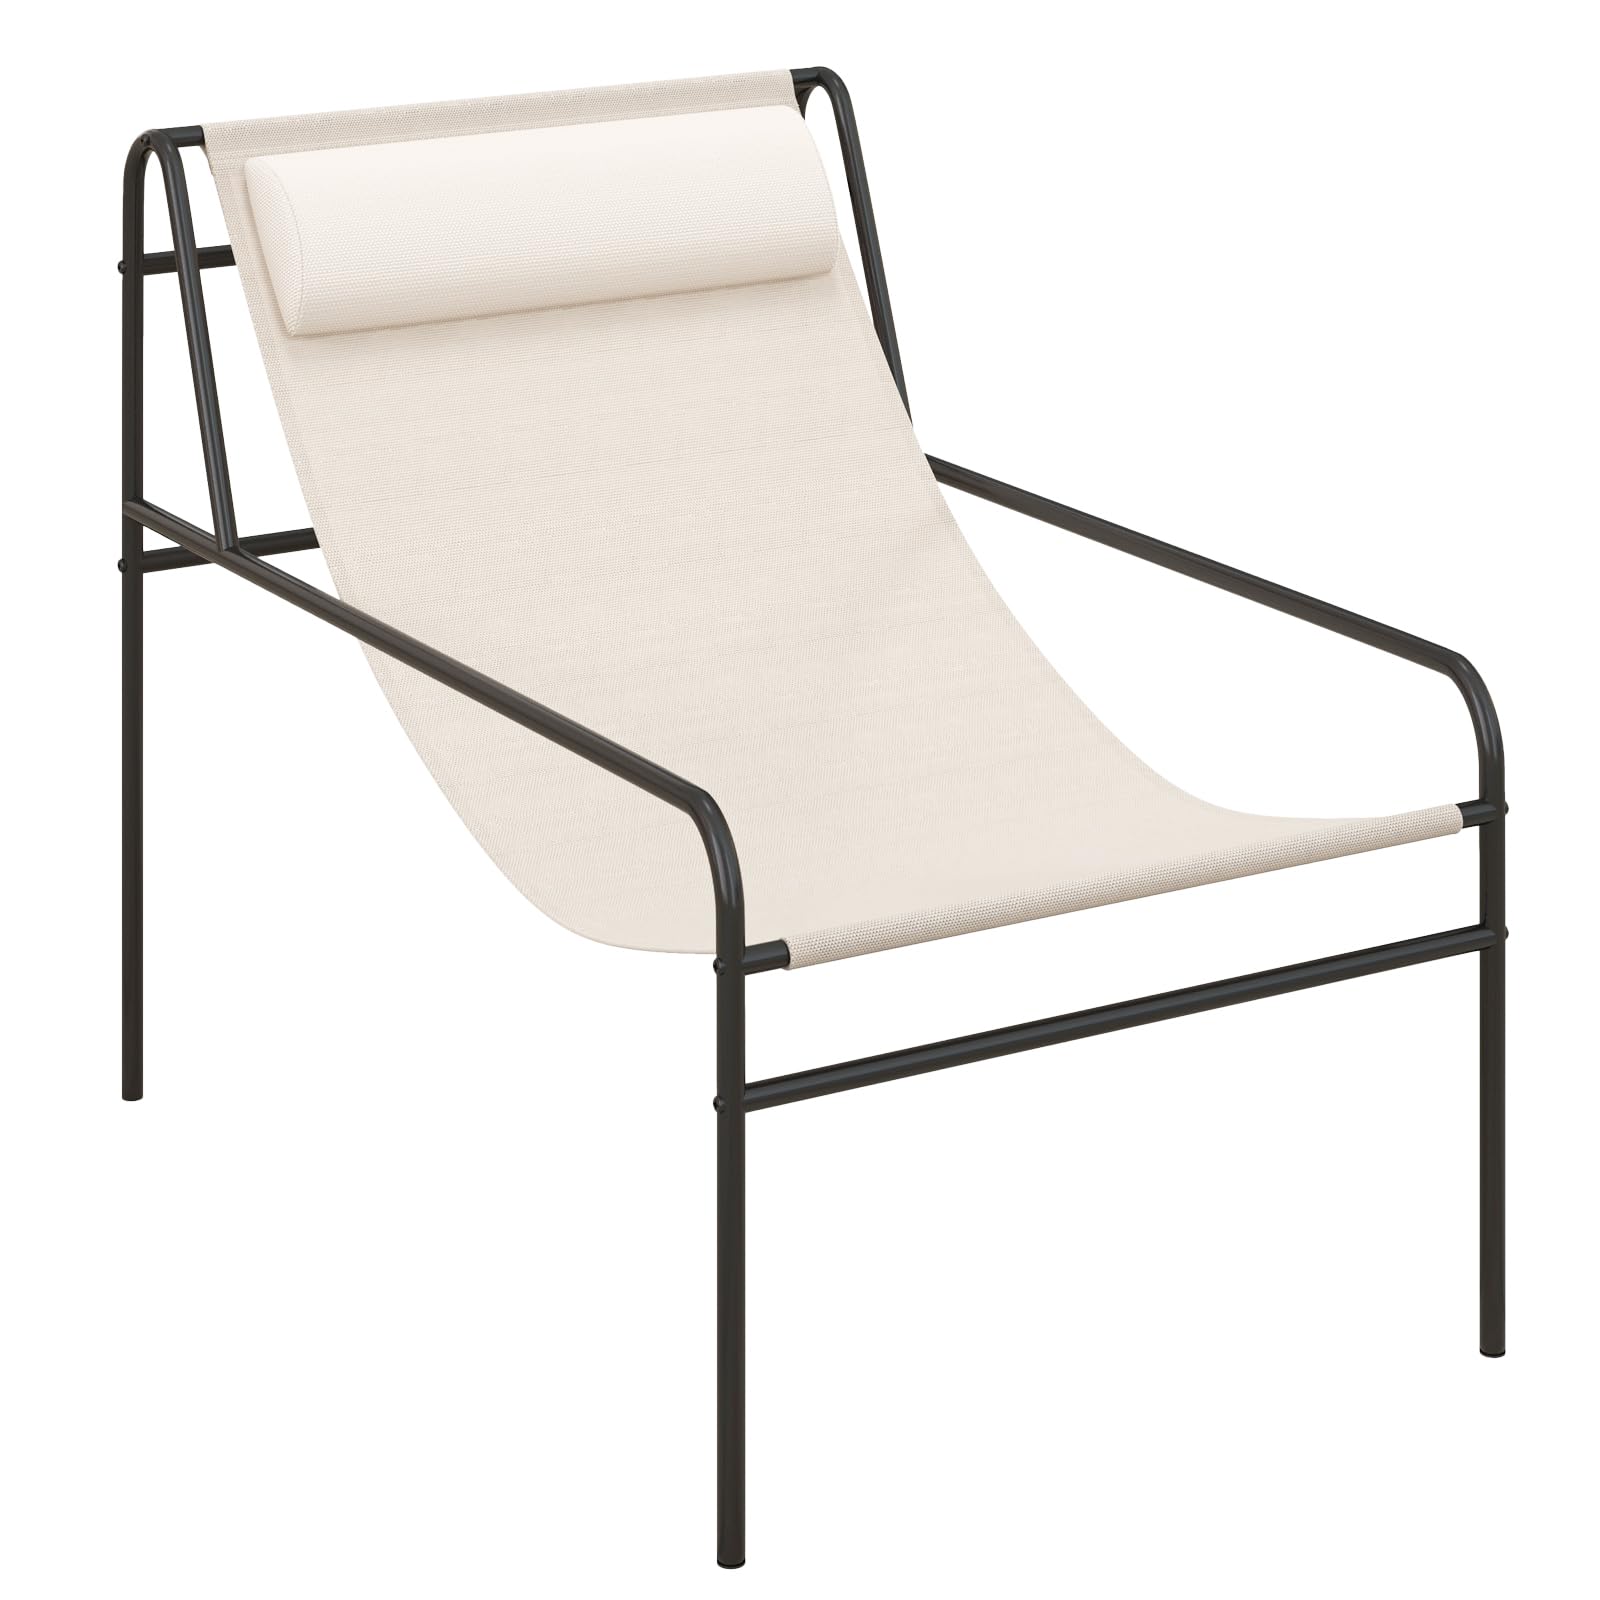 Giantex Patio Sling Lounge Chair, Modern Sling Accent Chair with Removable Headrest Pillow